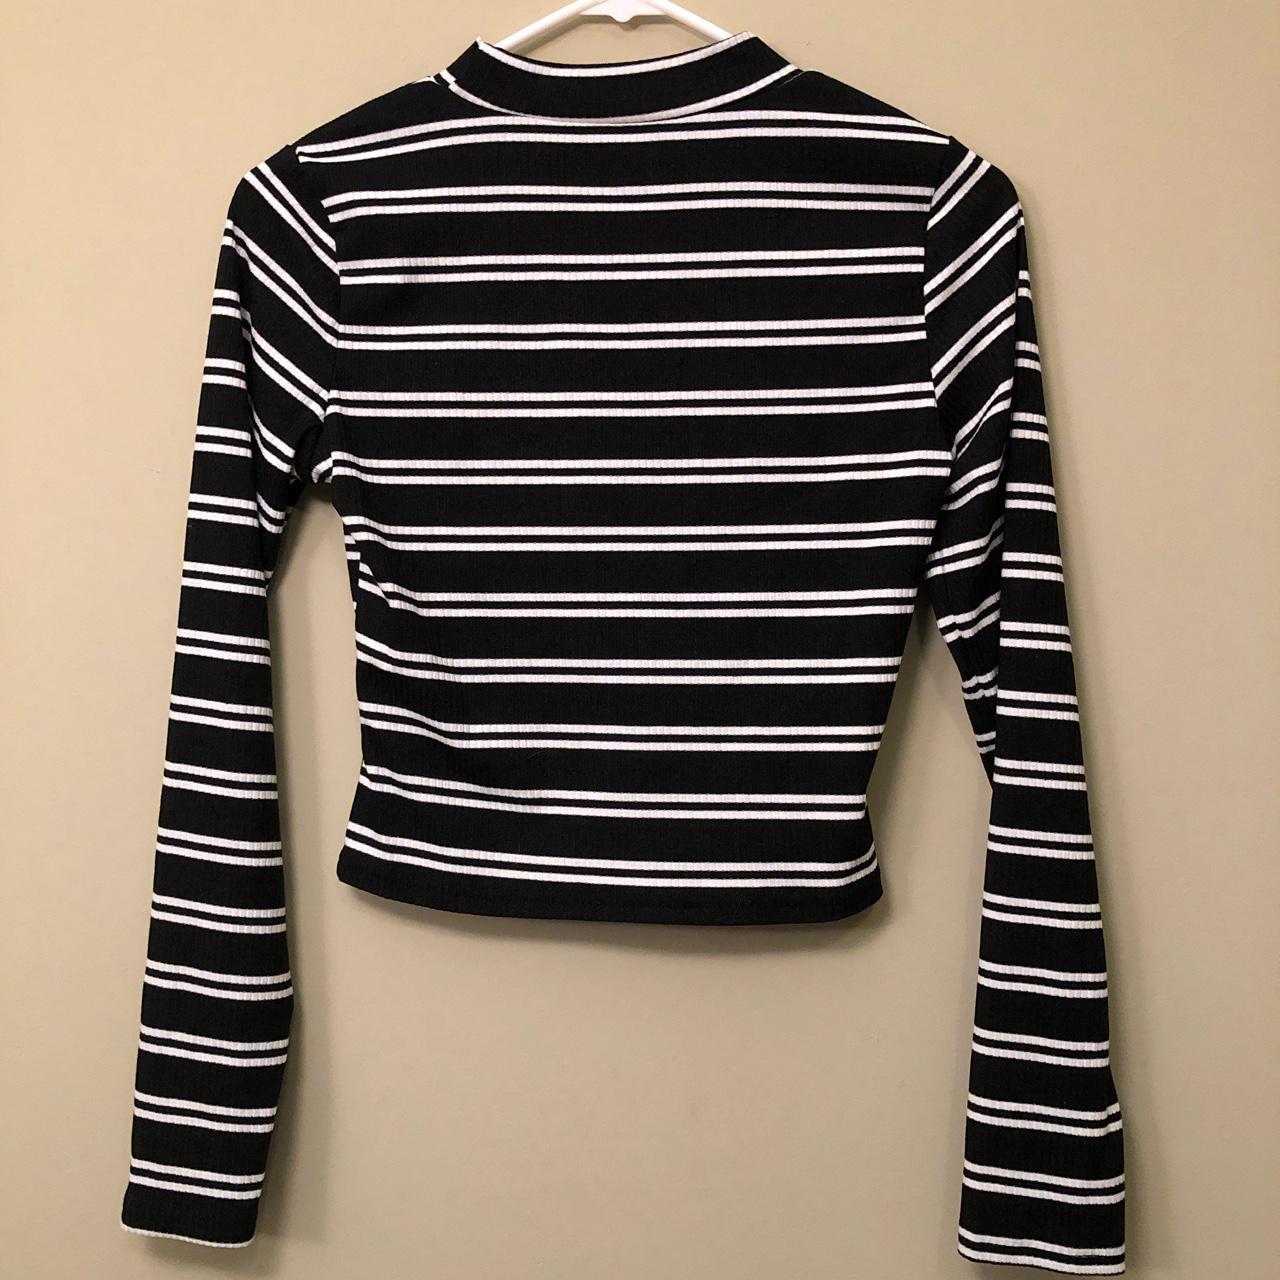 Product Image 3 - Black and White Striped Long